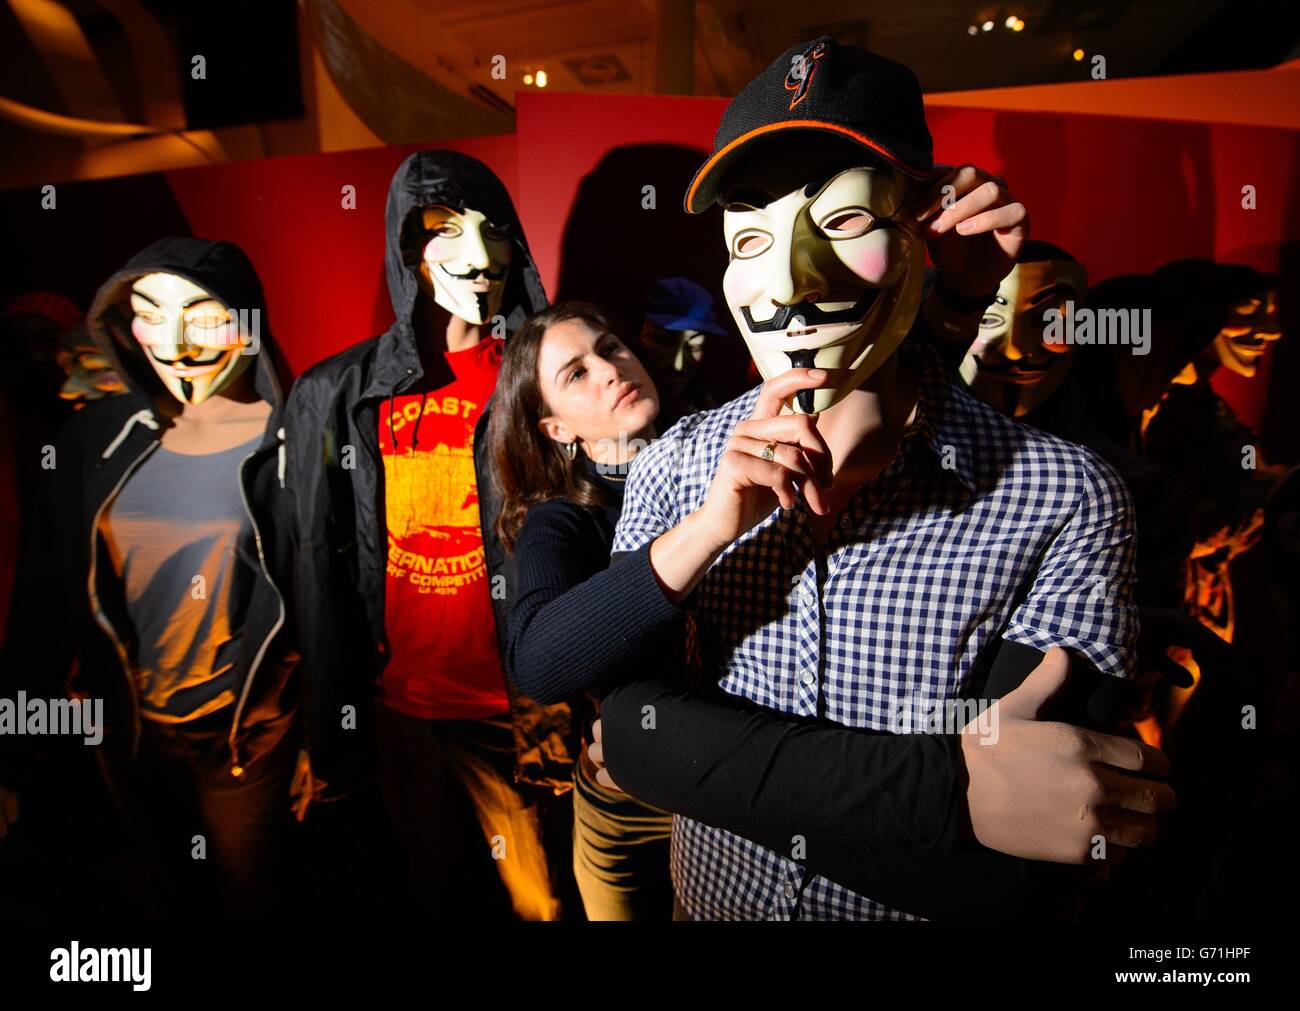 Evie Jeffreys adjusts models wearing masks from the comic 'V for Vendetta', part of the 'Comics Unmasked - Art and Anarchy in the UK' exhibition at the British Library, London, which runs from May 2 to August 19. Stock Photo